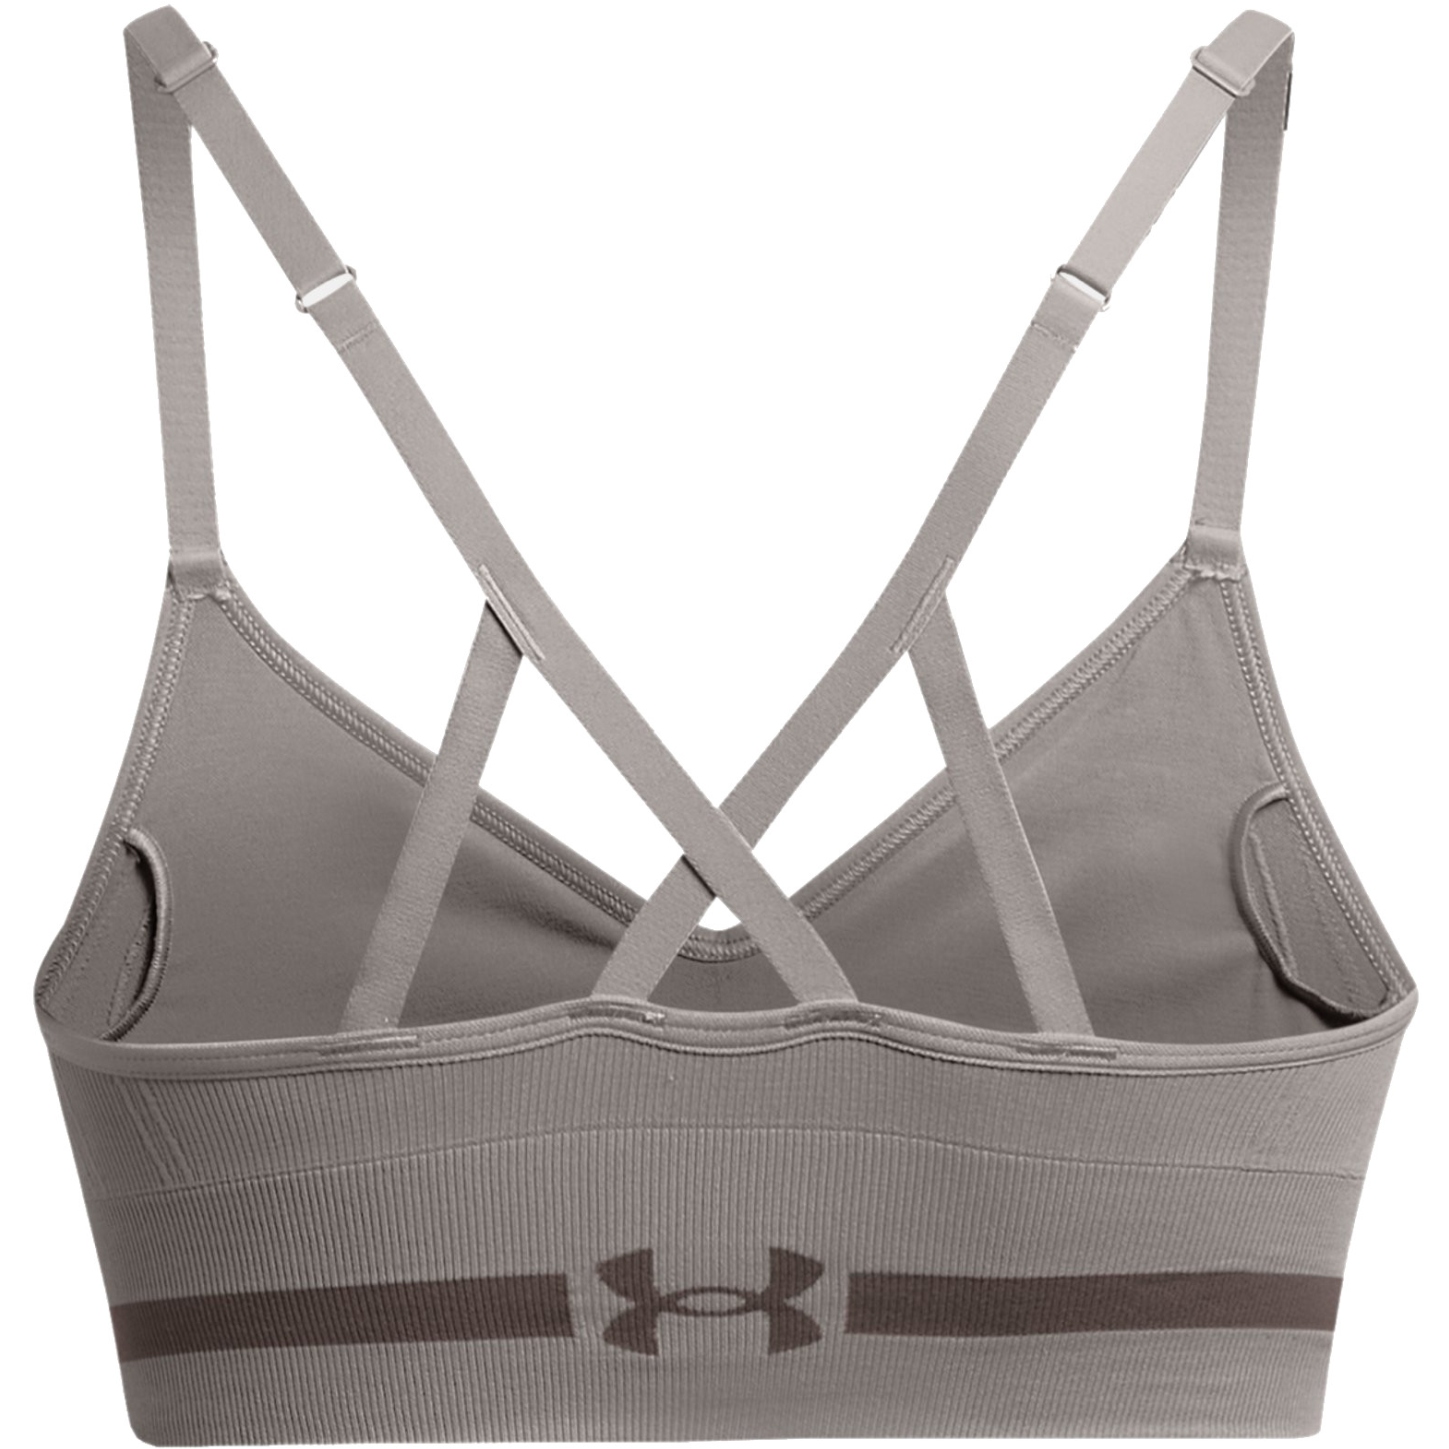 Under Armour SEAMLESS LOW LONG BRA - Light support sports bra -  pewter/fresh clay/stone 